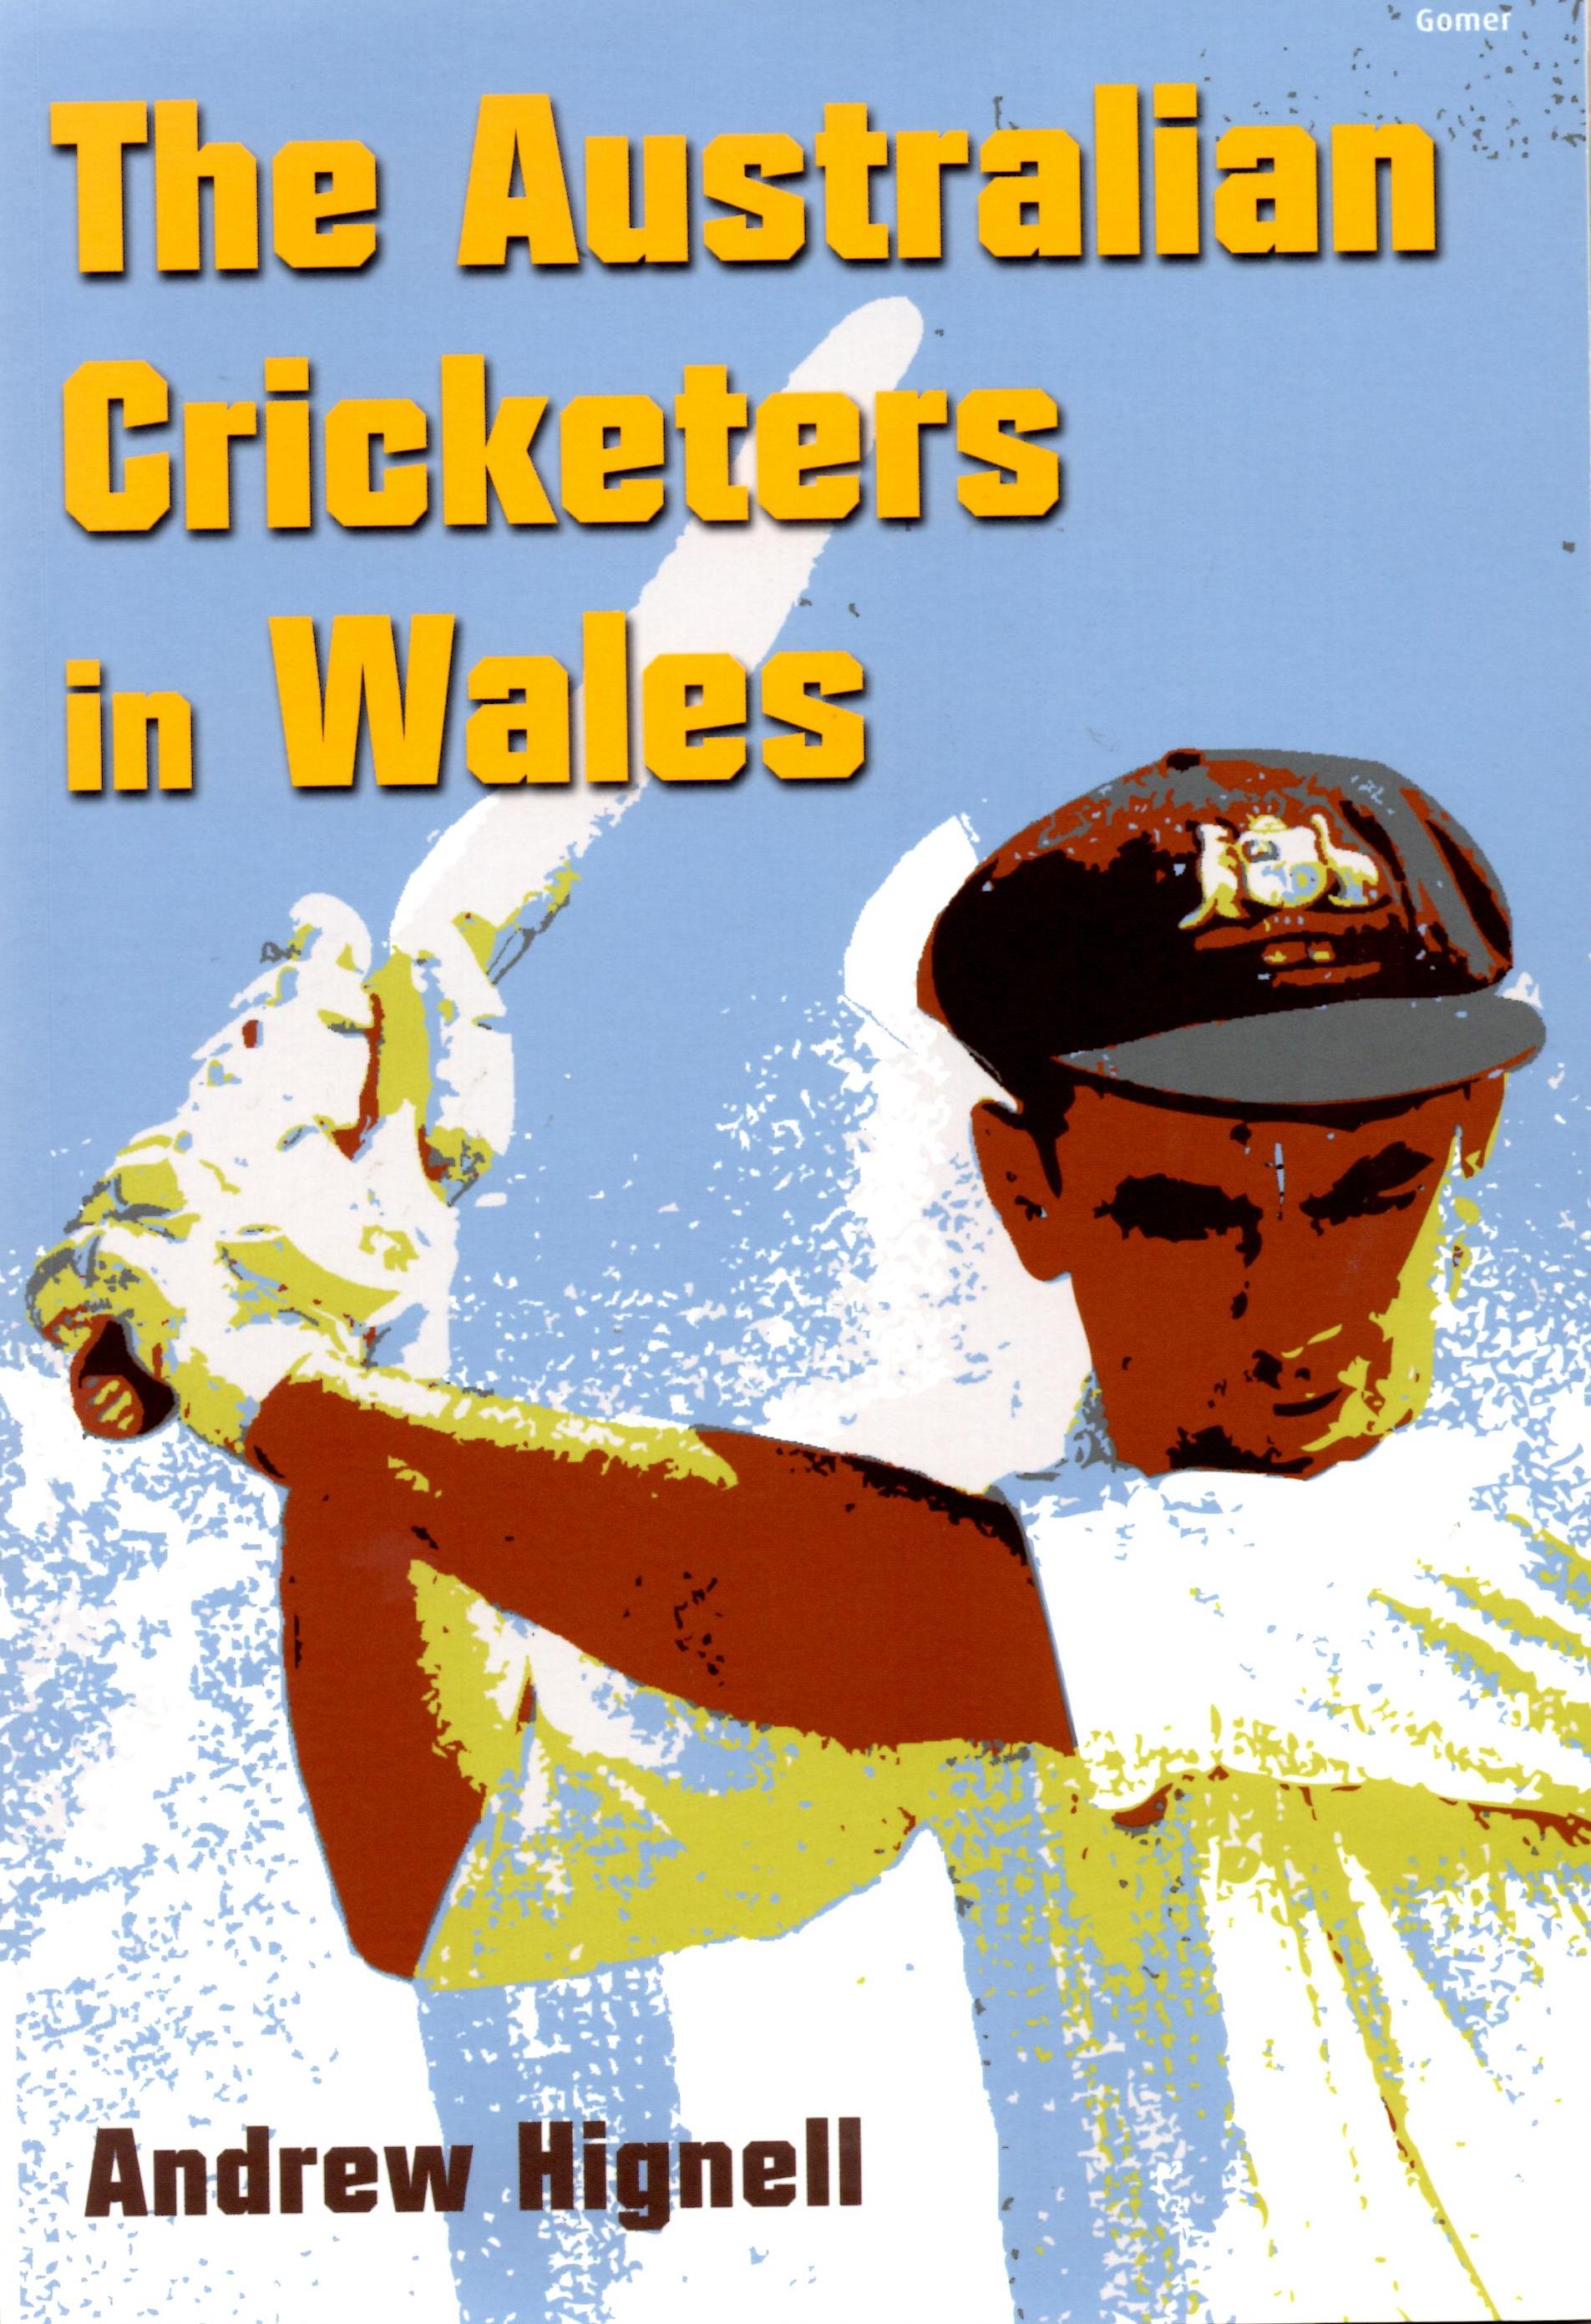 The Australian Cricketers in Wales by Andrew Hignell